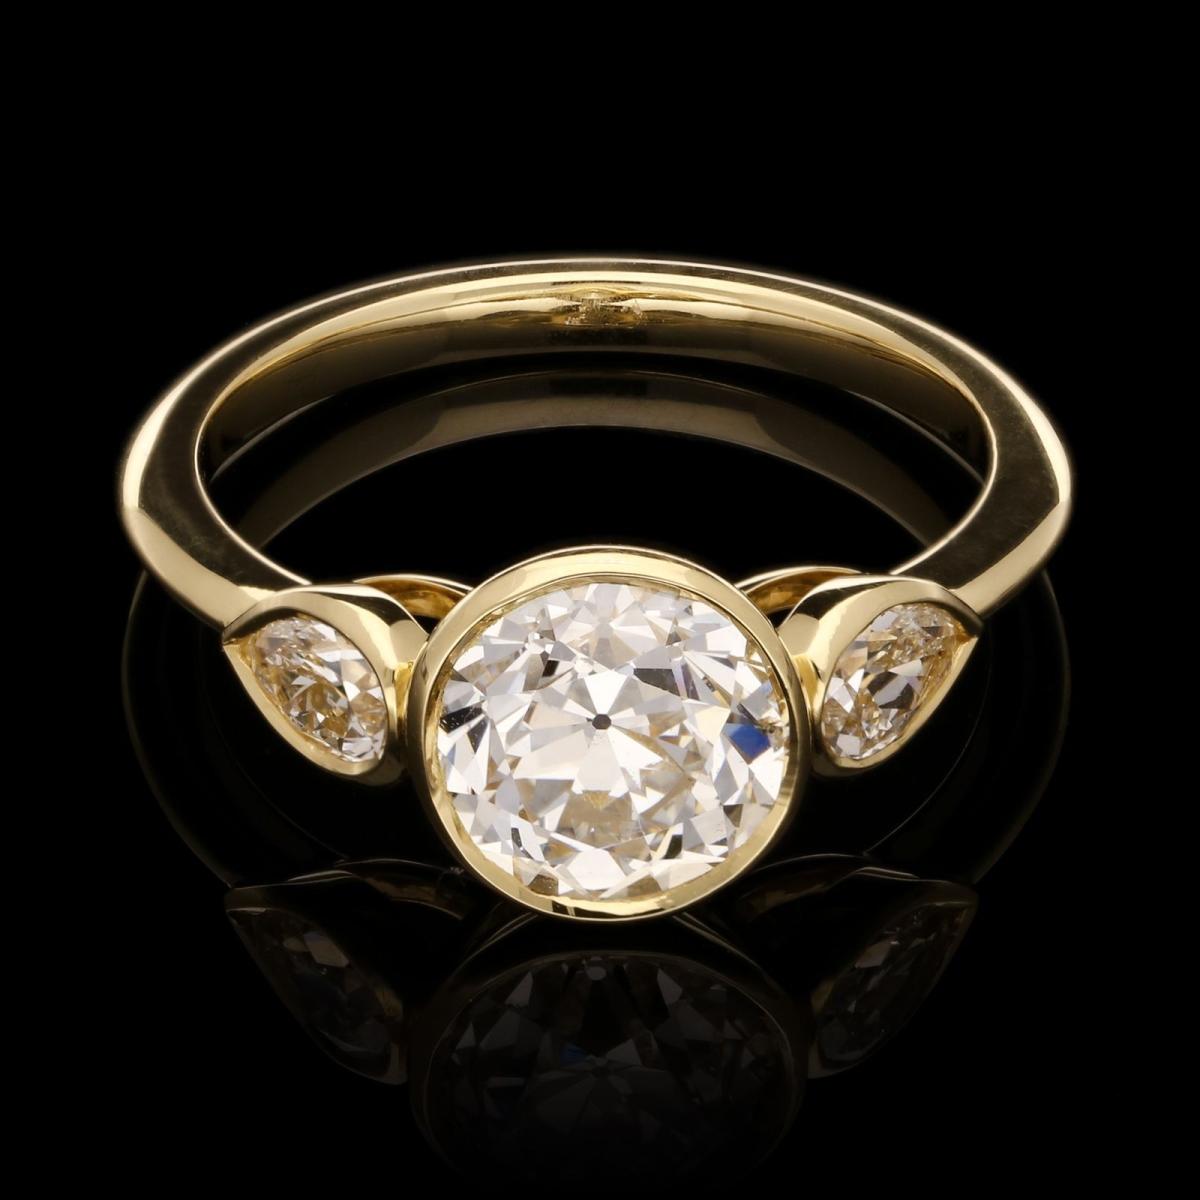 Hancocks 1.77ct Old Cut Diamond Ring With Pear Shaped Shoulders In Rub Over 18ct Gold Setting